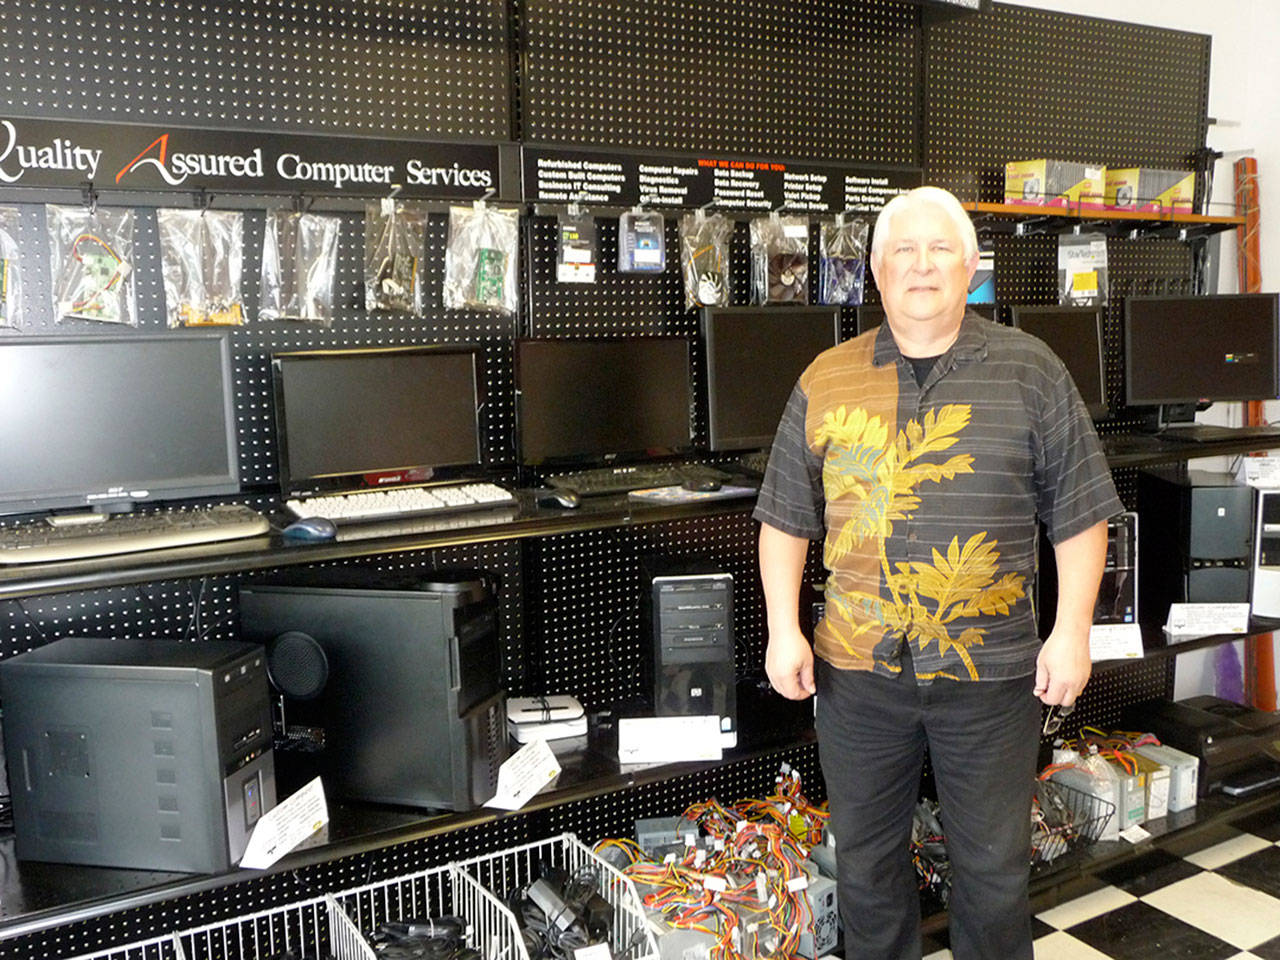 Jim Manderscheid, co-owner of Quality Assured Computer Services, displays a wall full of affordable refurbished computers. Sequim Gazette photo by Patricia Morrison Coate